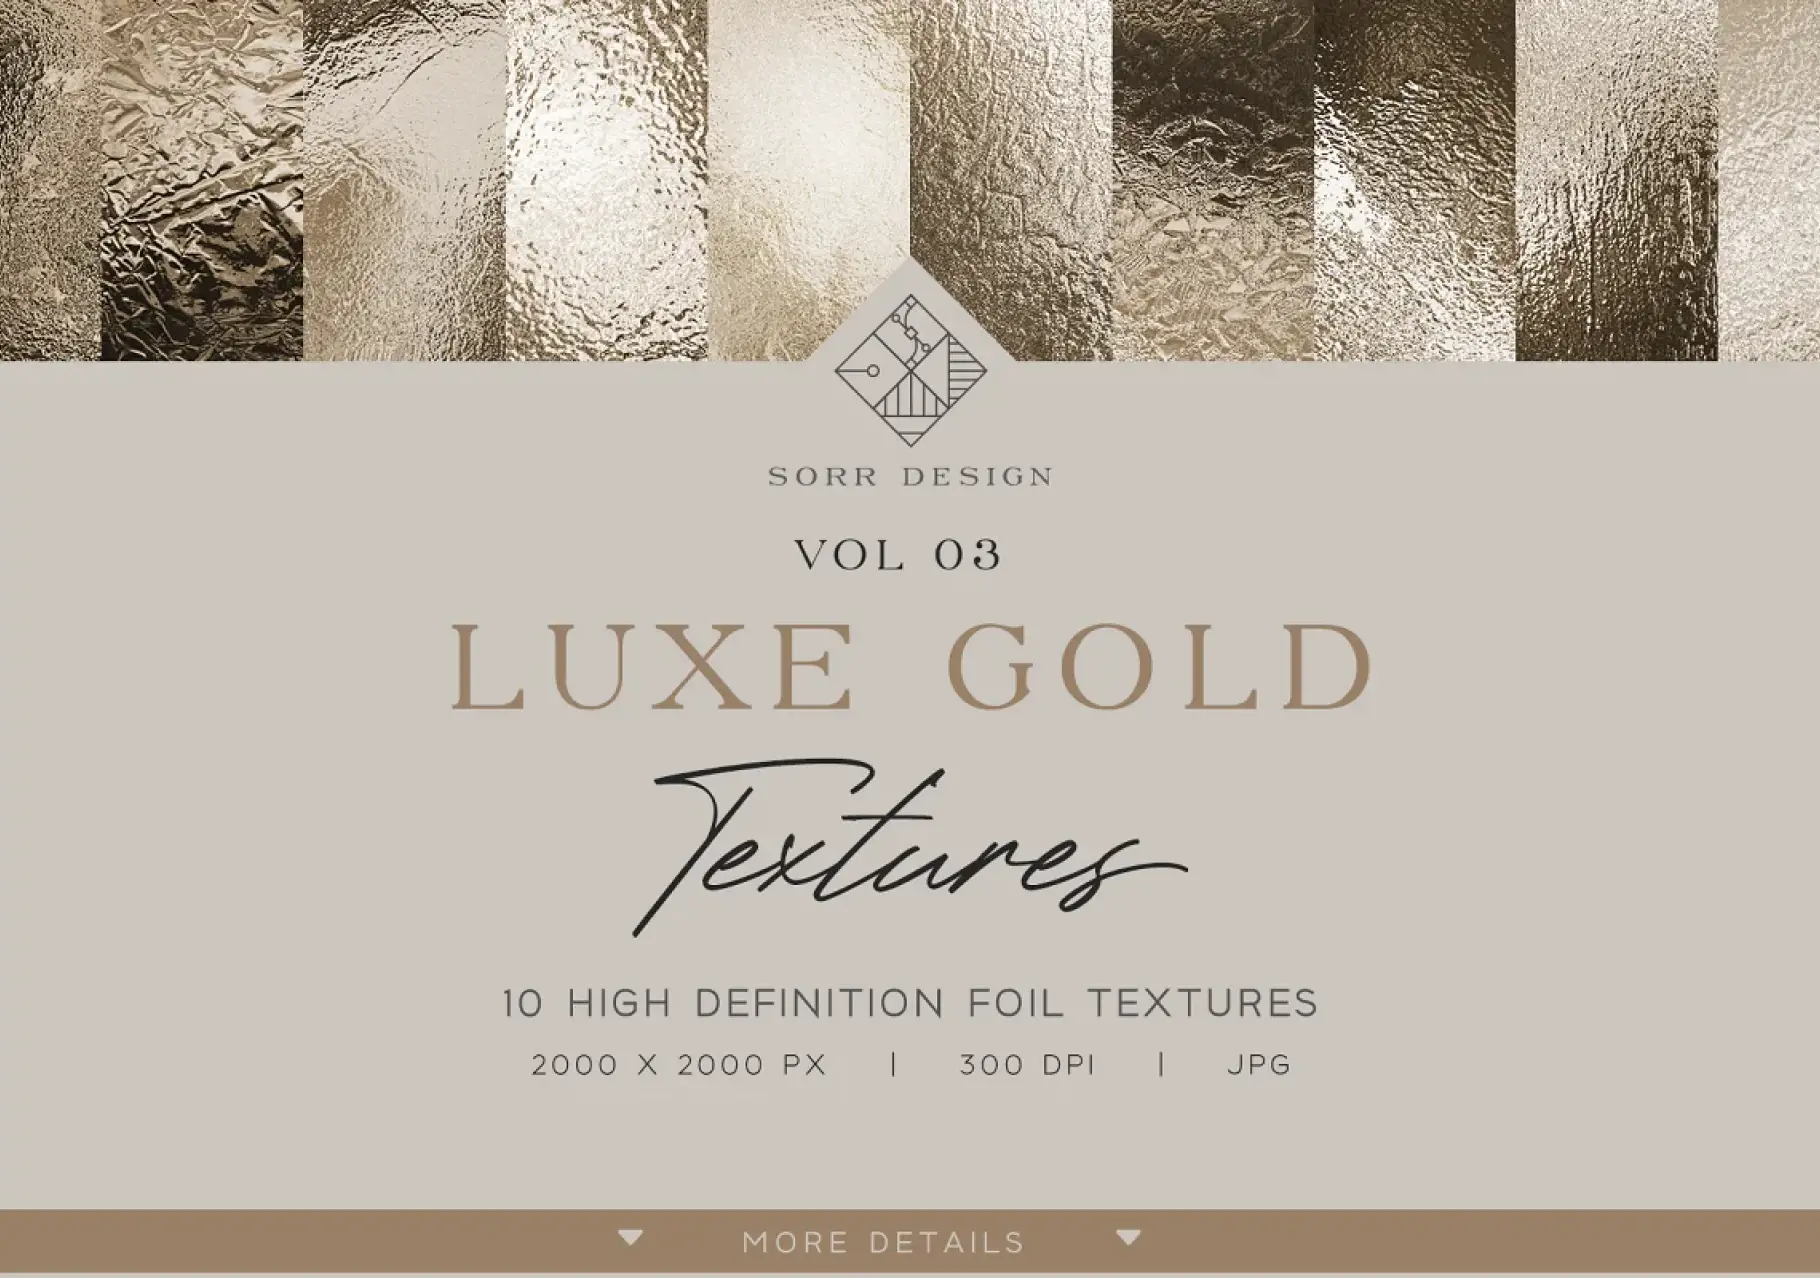 10 Luxe Gold Textures เล่มที่ 03 -